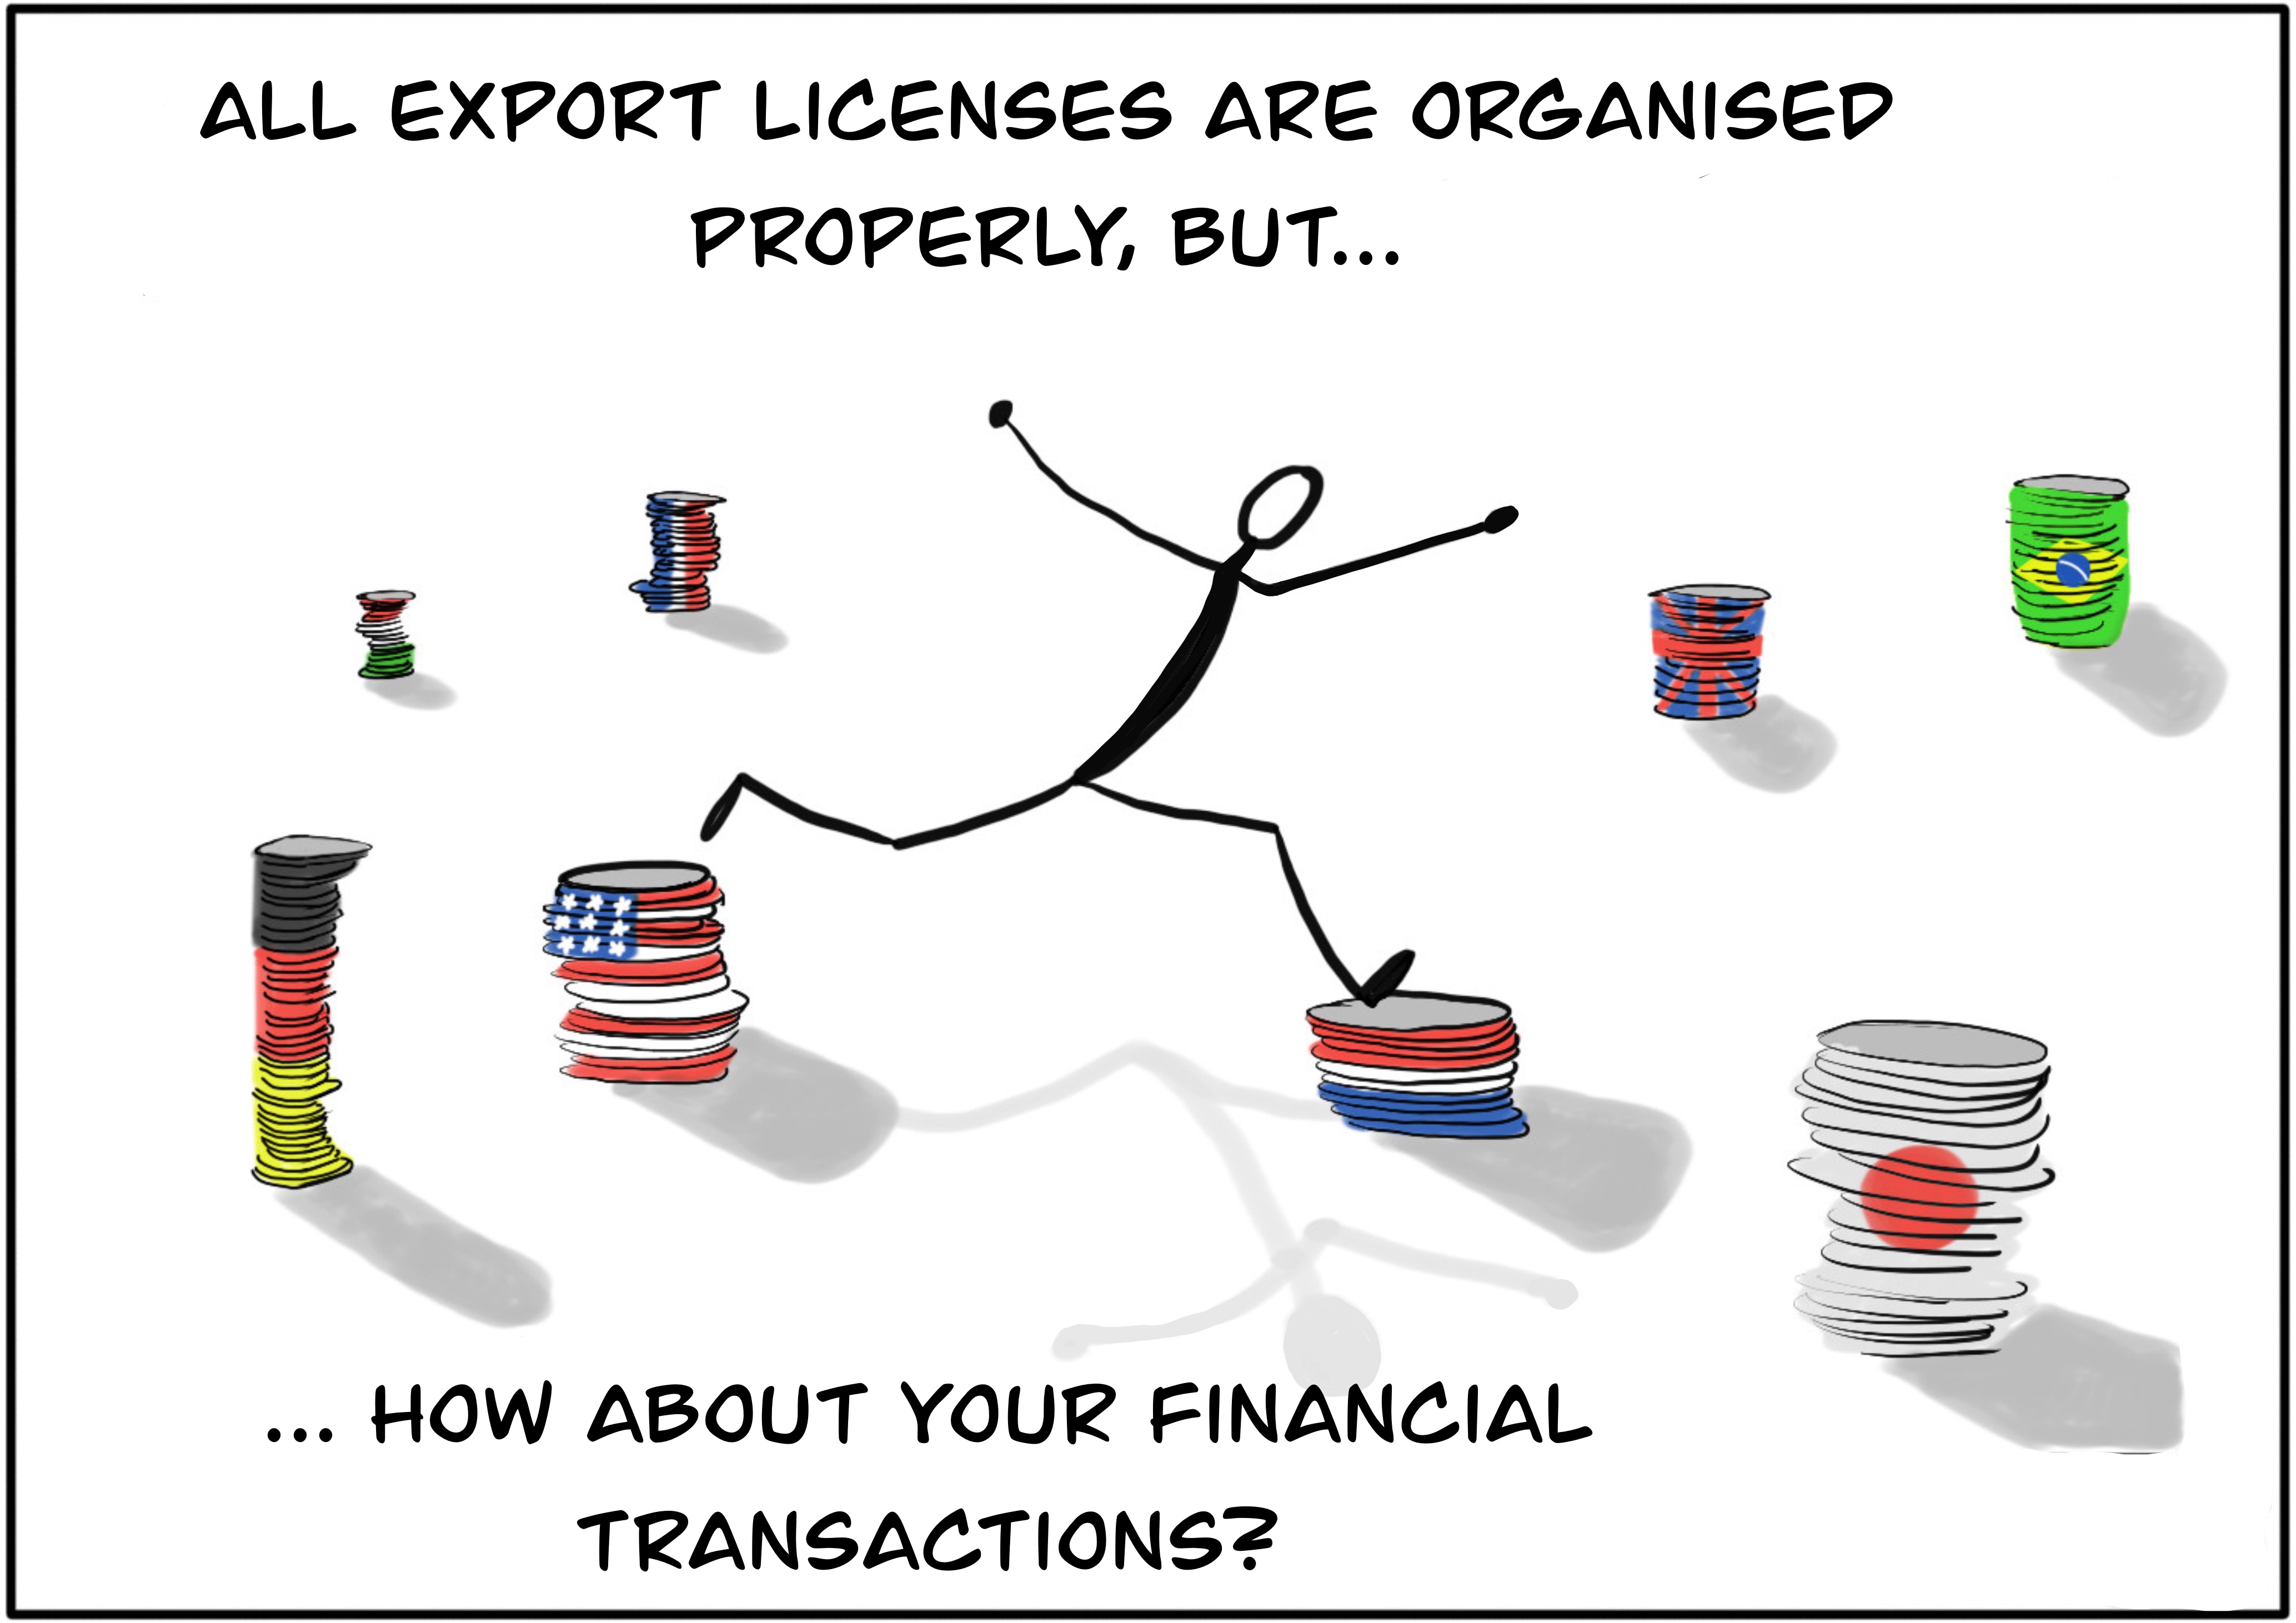 All export licenses are organized properly, but how about your financial transactions?